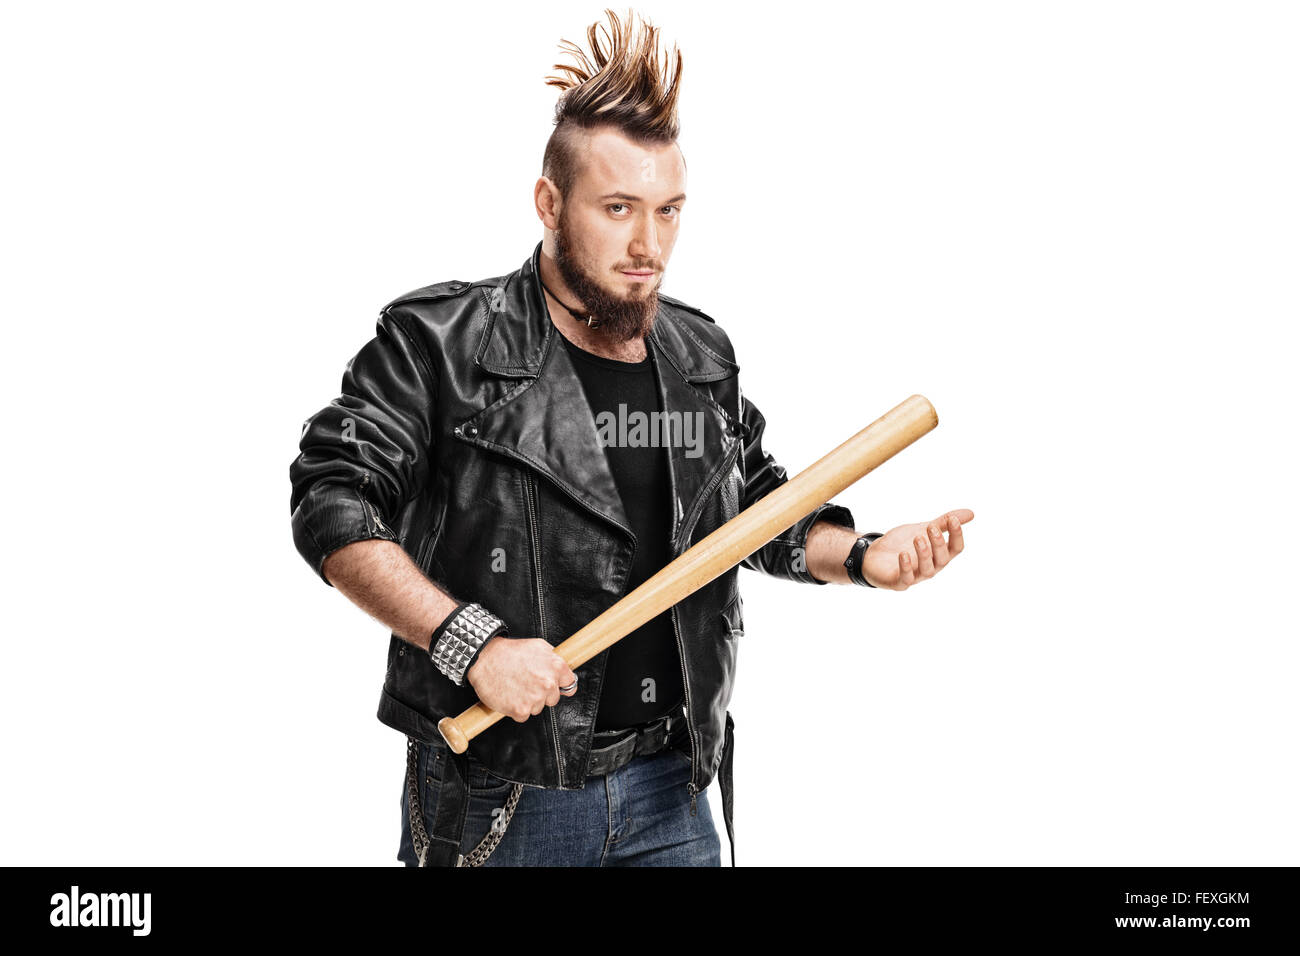 Young violent punk rocker holding a baseball bat and looking at the camera  isolated on white background Stock Photo - Alamy